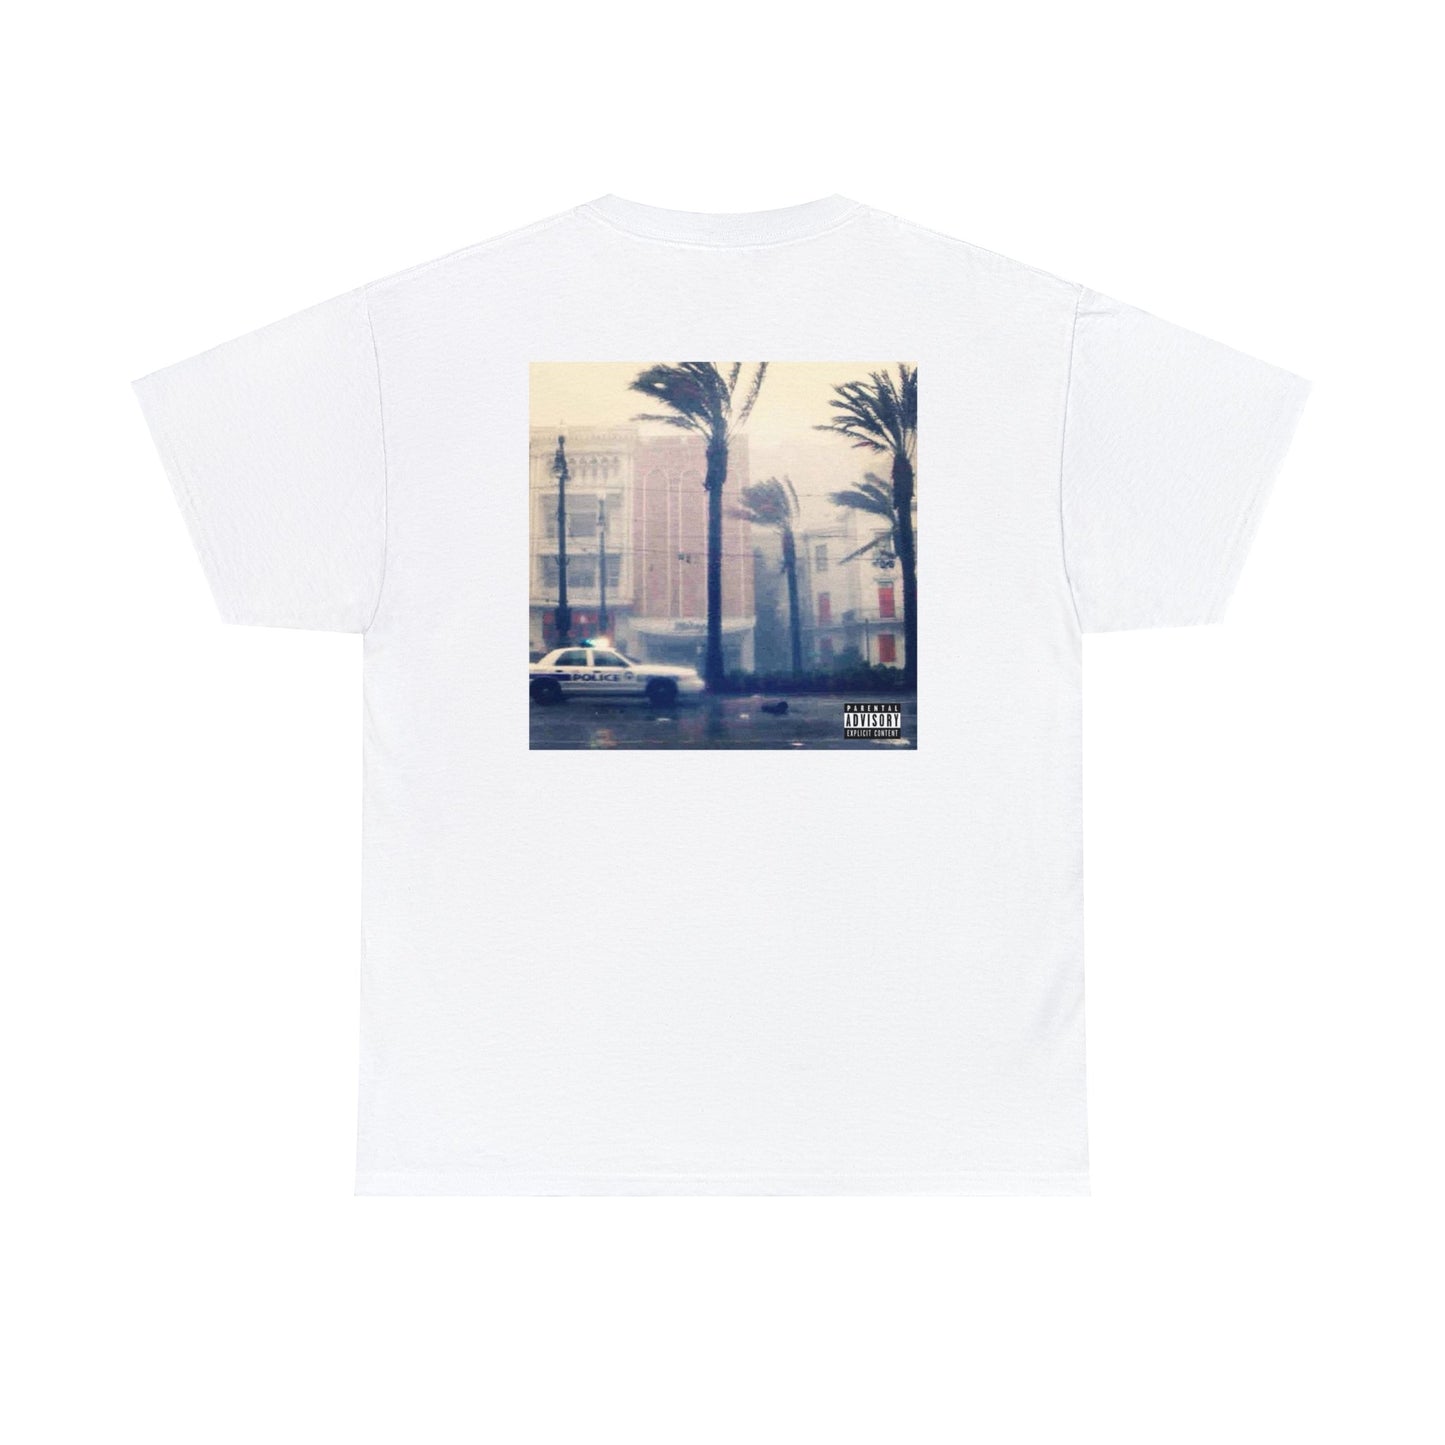 SuicideBoys 7th or St. Tammany Album Cover T-shirt